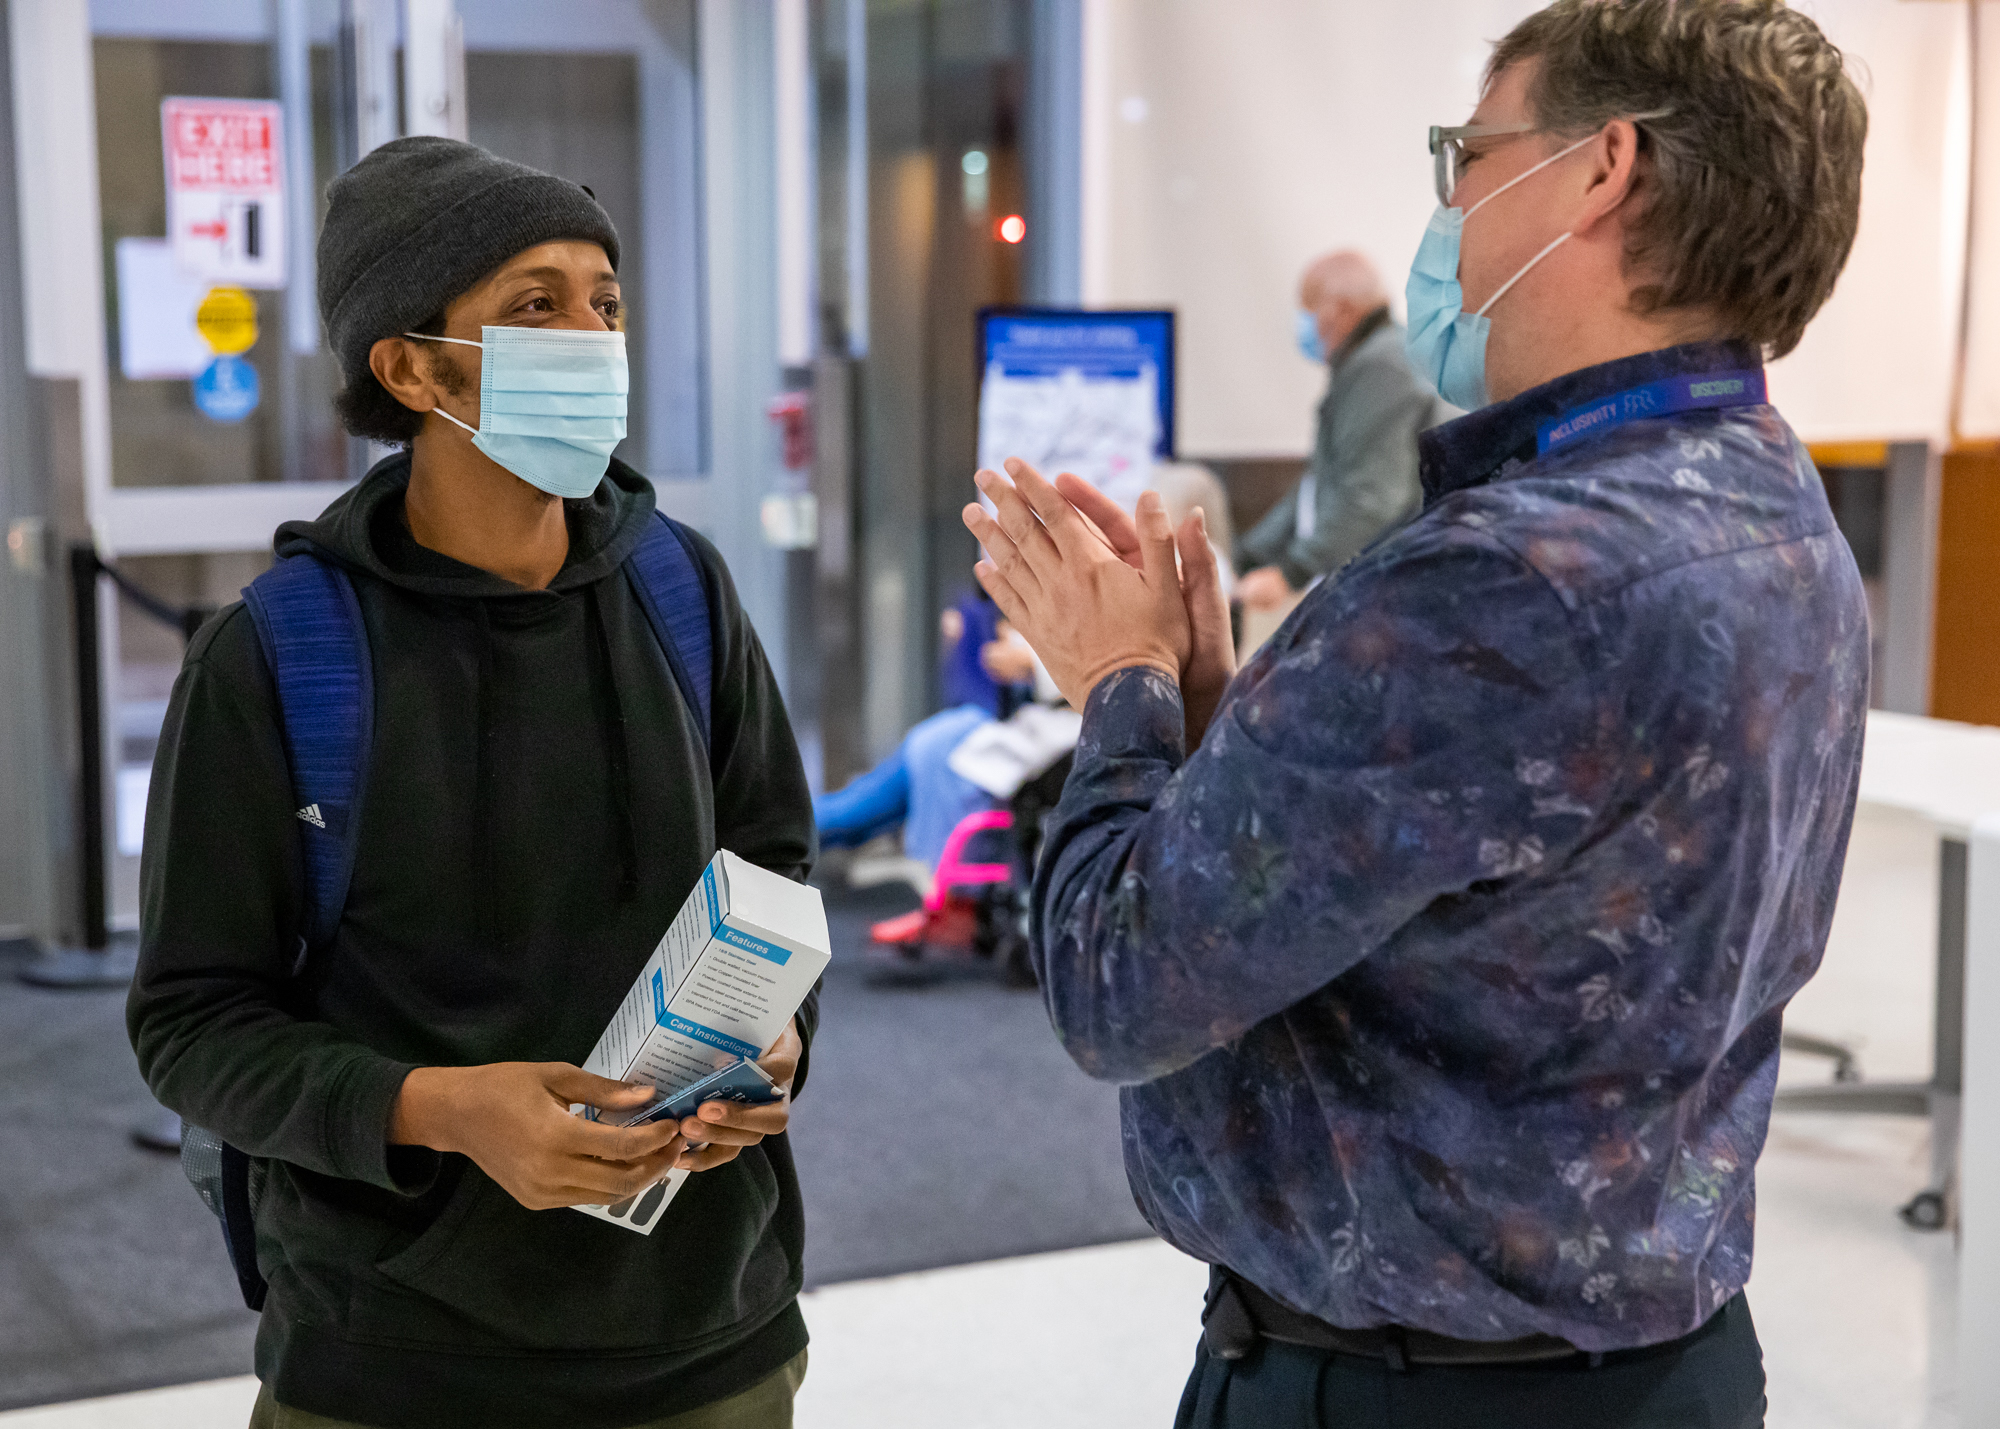 Dr. Mark Lachman a leader at Bridgepoint Hennick Hospital, makes a thank you gesture with his hands as he speaks with an employee arriving at the hospital.